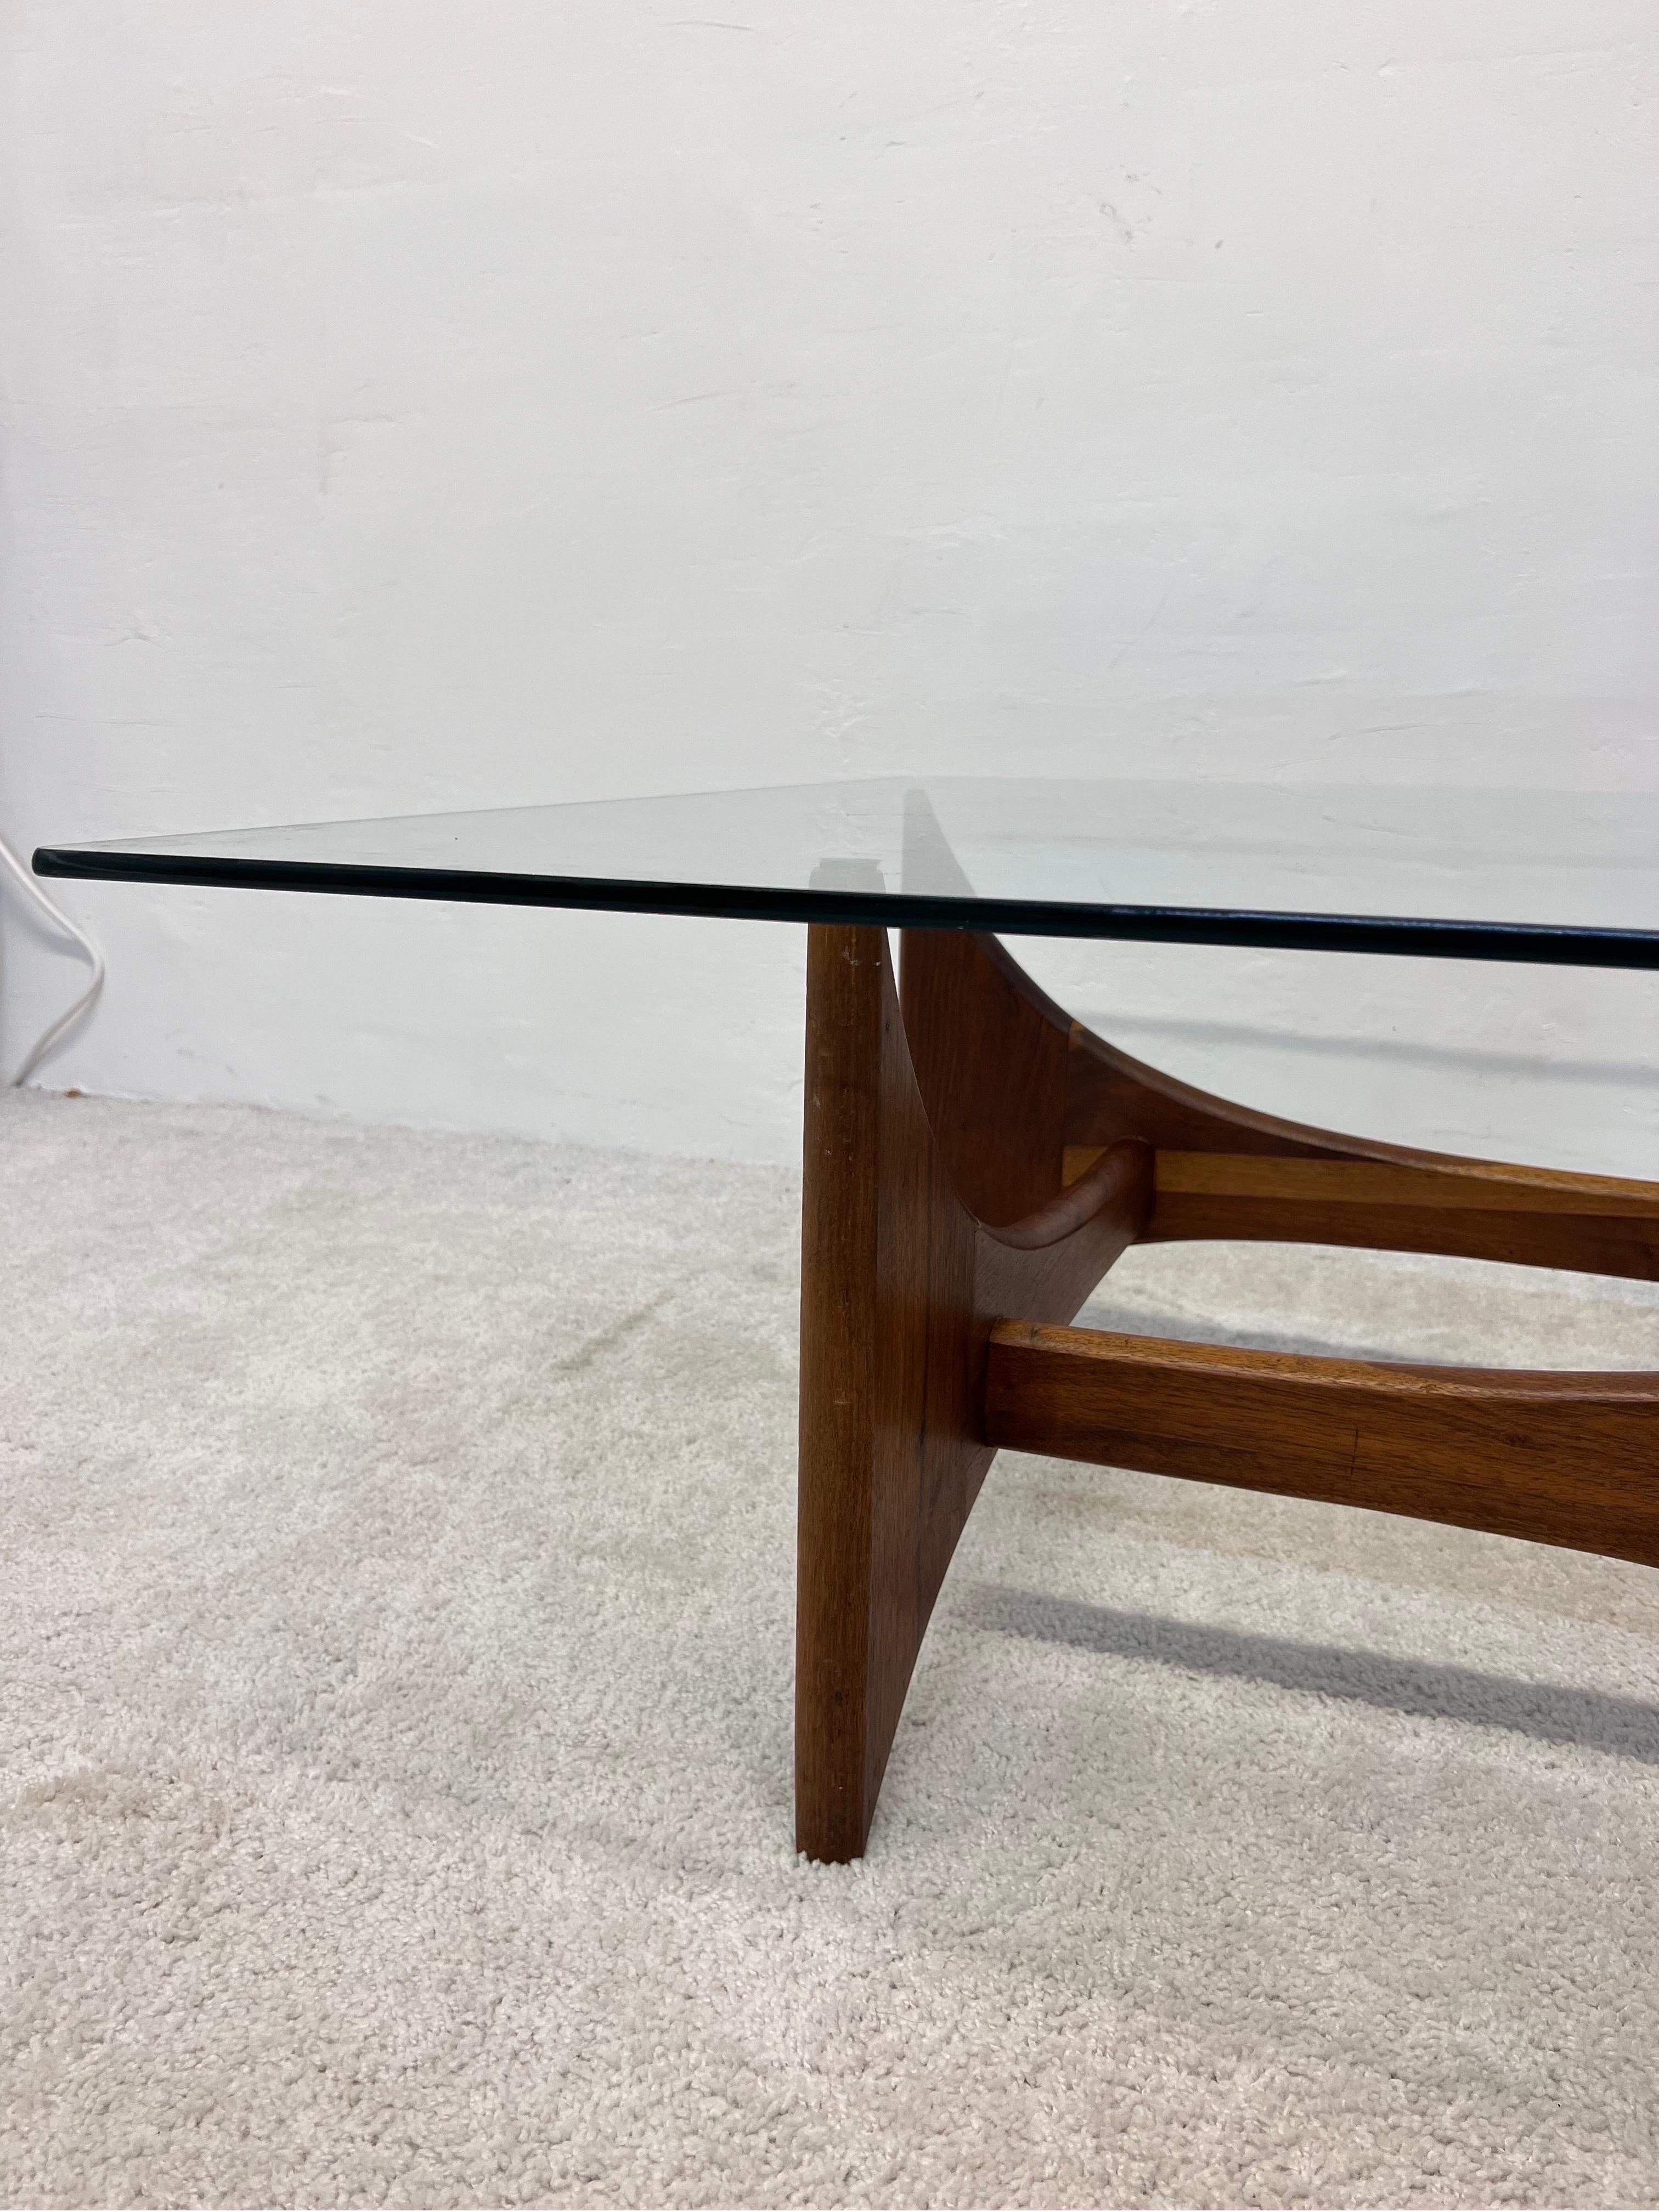 20th Century American Modern Walnut and Glass Coffee or Cocktail Table by Adrian Pearsall For Sale